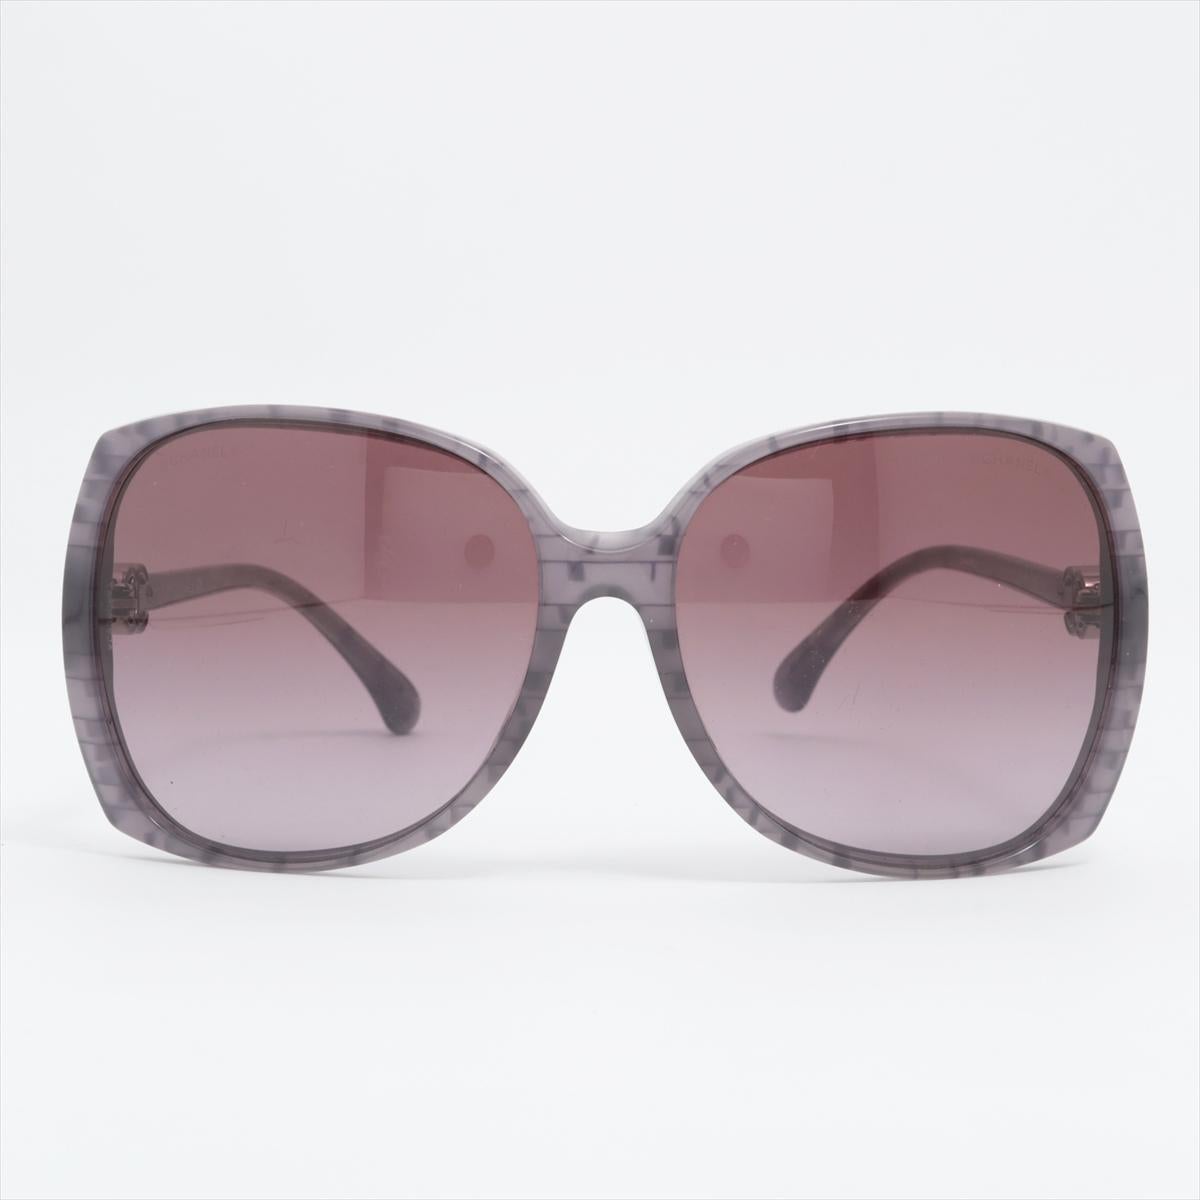 The Chanel CC Logo Oversize Sunglasses in Plastic Purple Gray are a bold and stylish accessory that epitomizes luxury and sophistication. Featuring oversized square frames, the sunglasses make a statement with their striking purple-gray color